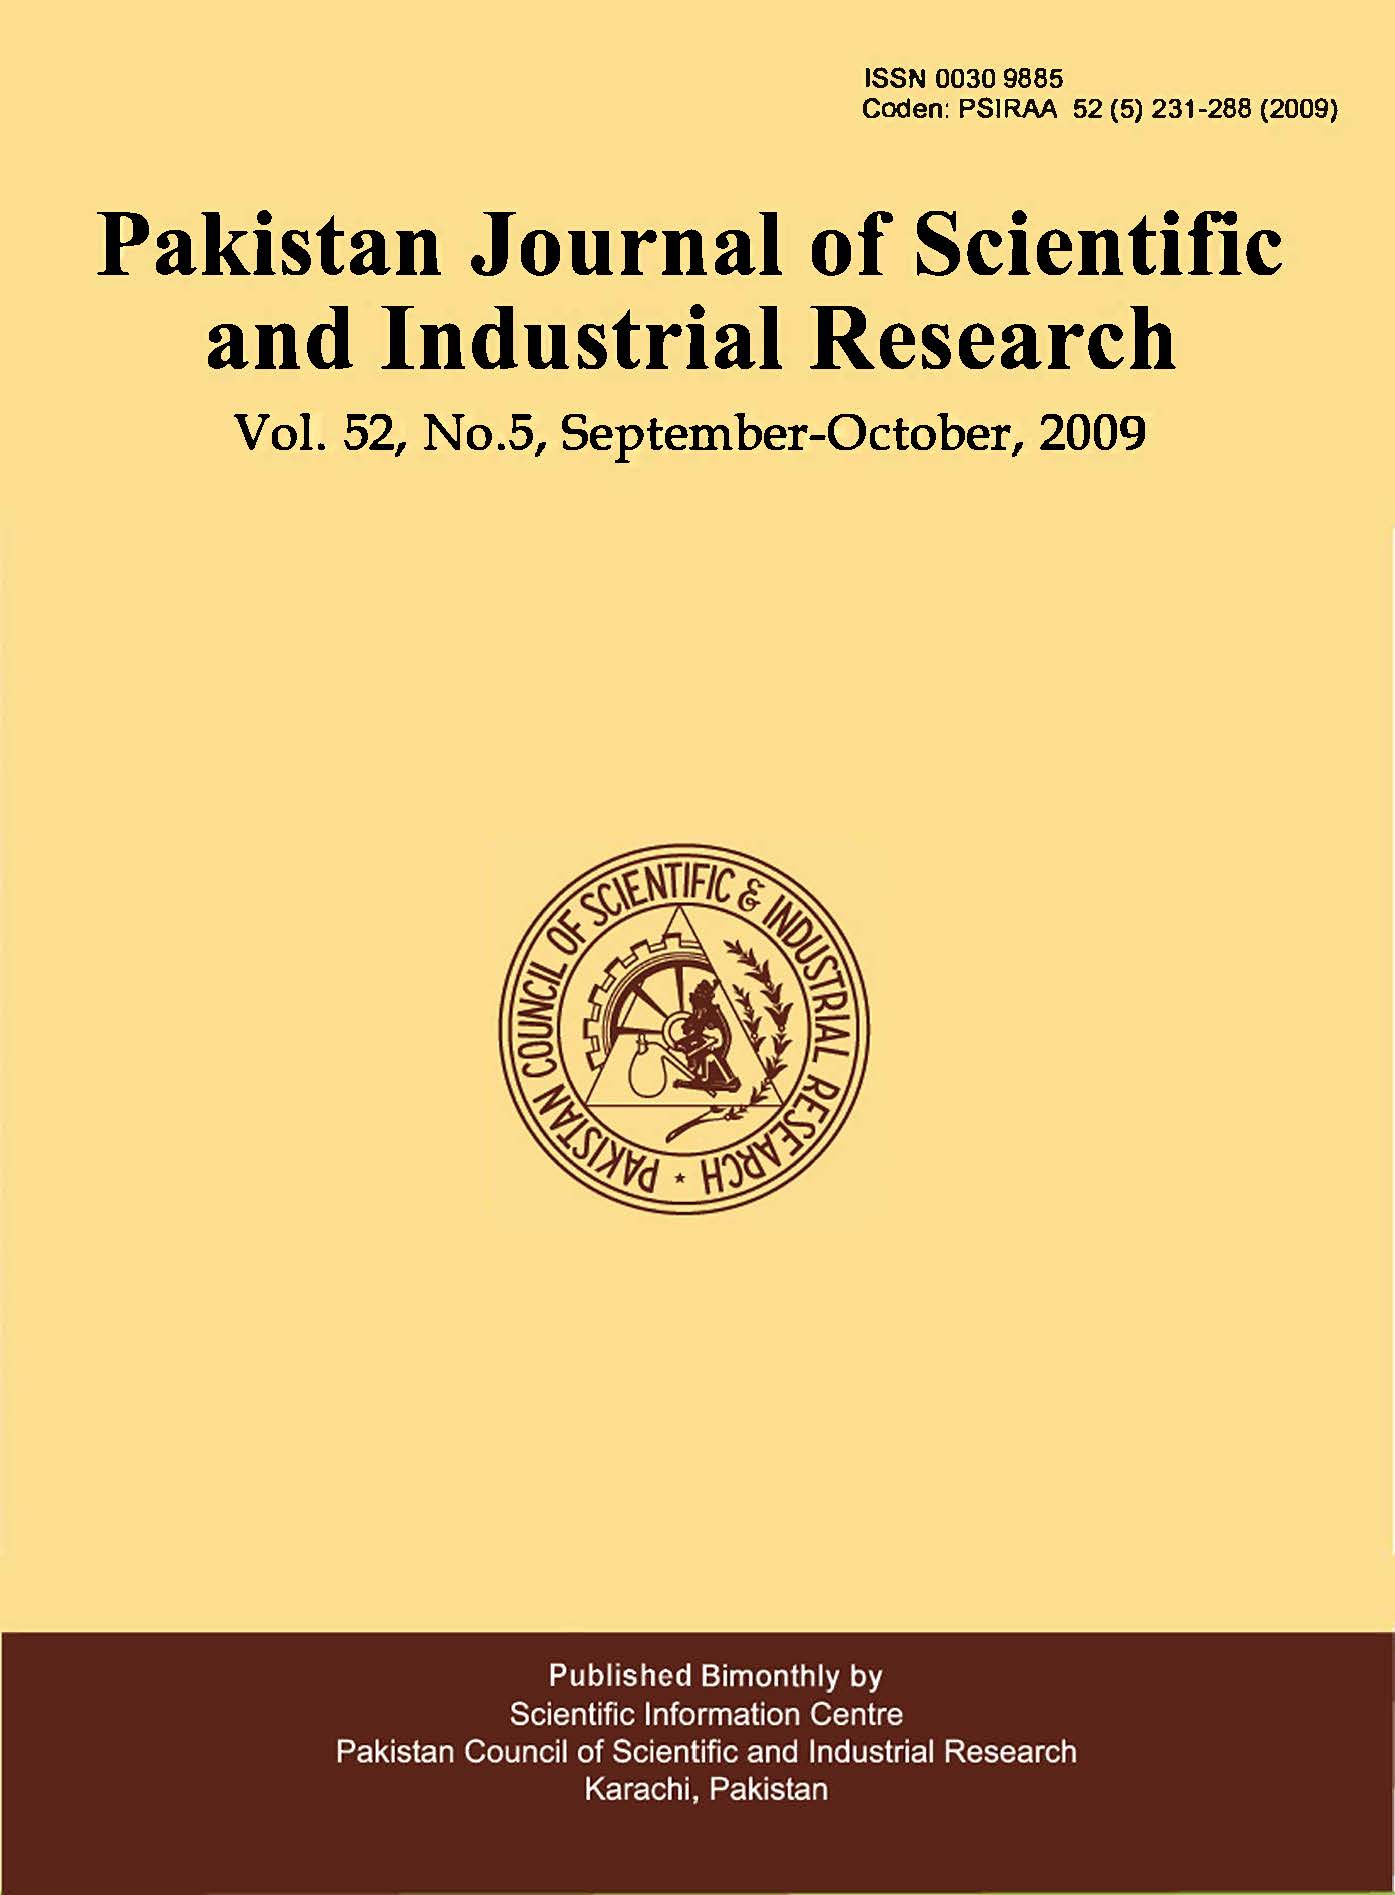 					View Vol. 52 No. 5 (2009): Pakistan Journal of Scientific and Industrial Research
				